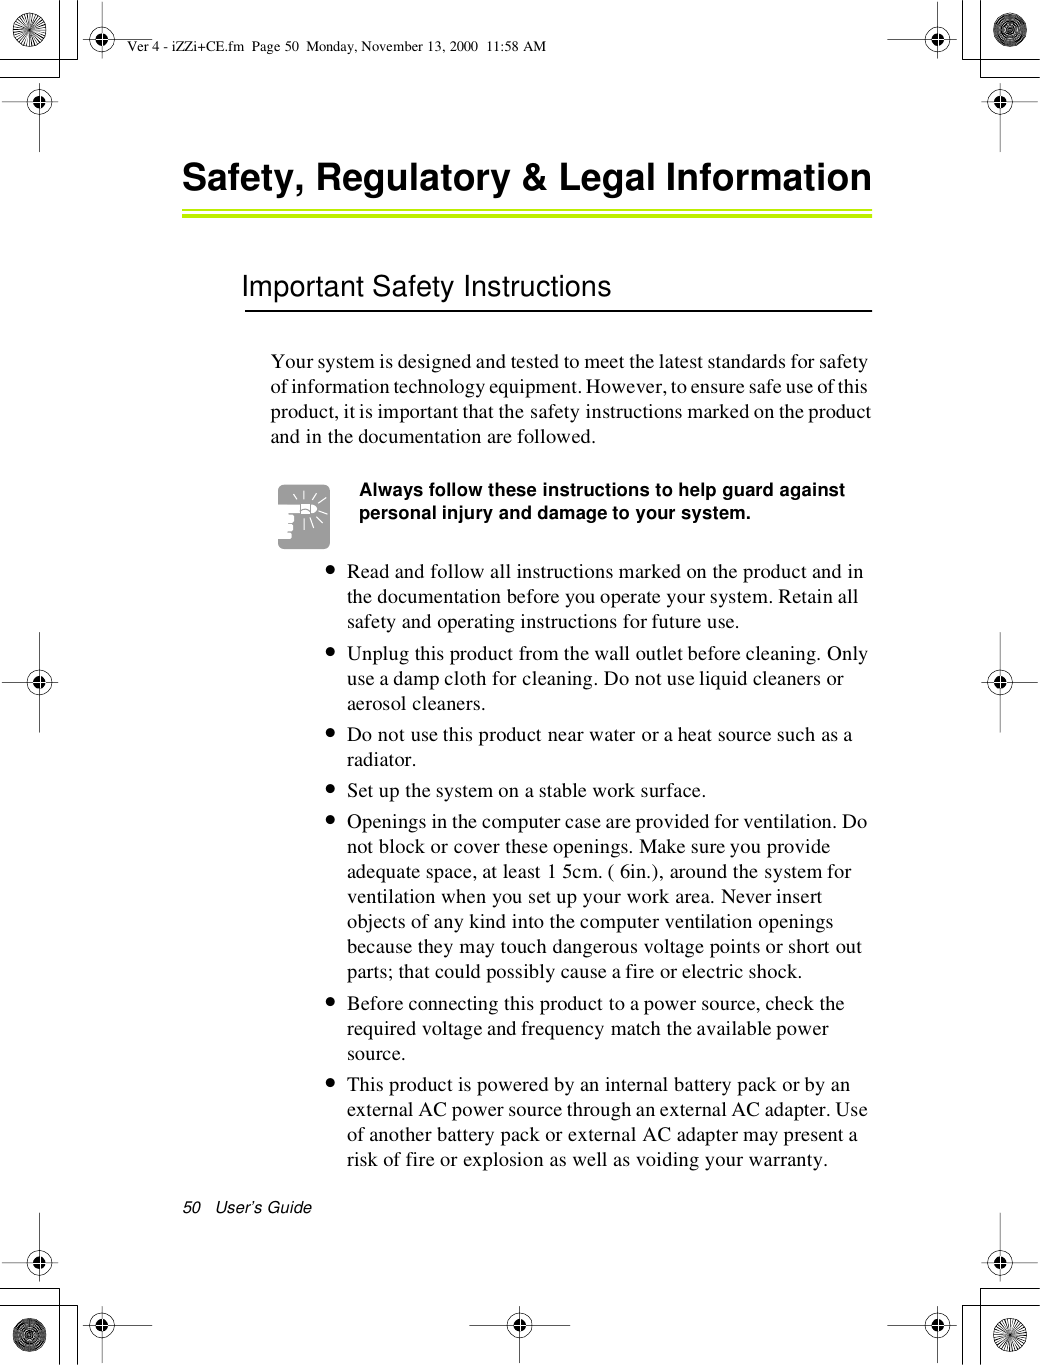 50 User’s GuideSafety, Regulatory &amp;Legal InformationImportant Safety InstructionsYour system is designed and tested to meet the latest standards for safetyof information technology equipment.However, to ensure safe use of thisproduct, it is important that the safety instructions marked on the productandinthedocumentationarefollowed.Always follow these instructions to help guard againstpersonal injury and damage to your system.•Read and follow all instructions marked on the product and inthe documentation before you operate your system. Retain allsafety and operating instructions for future use.•Unplug this product from the wall outlet before cleaning. Onlyuse a damp cloth for cleaning. Do not use liquid cleaners oraerosol cleaners.•Do not use this product near water or a heat source such as aradiator.•Set up the system on a stable work surface.•Openings in the computer case are provided for ventilation. Donot block or cover these openings. Make sure you provideadequate space, at least 1 5cm. ( 6in.), around the system forventilation when you set up your work area. Never insertobjects of any kind into the computer ventilation openingsbecause they may touch dangerous voltage points or short outparts; that could possibly cause a fire or electric shock.•Before connecting this product to a power source, check therequired voltage and frequency match the available powersource.•This product is powered by an internal battery pack or by anexternal AC power source through an external AC adapter. Useof another battery pack or external AC adapter may present arisk of fire or explosion as well as voiding your warranty.Ver 4 - iZZi+CE.fm Page 50 Monday, November 13, 2000 11:58 AM